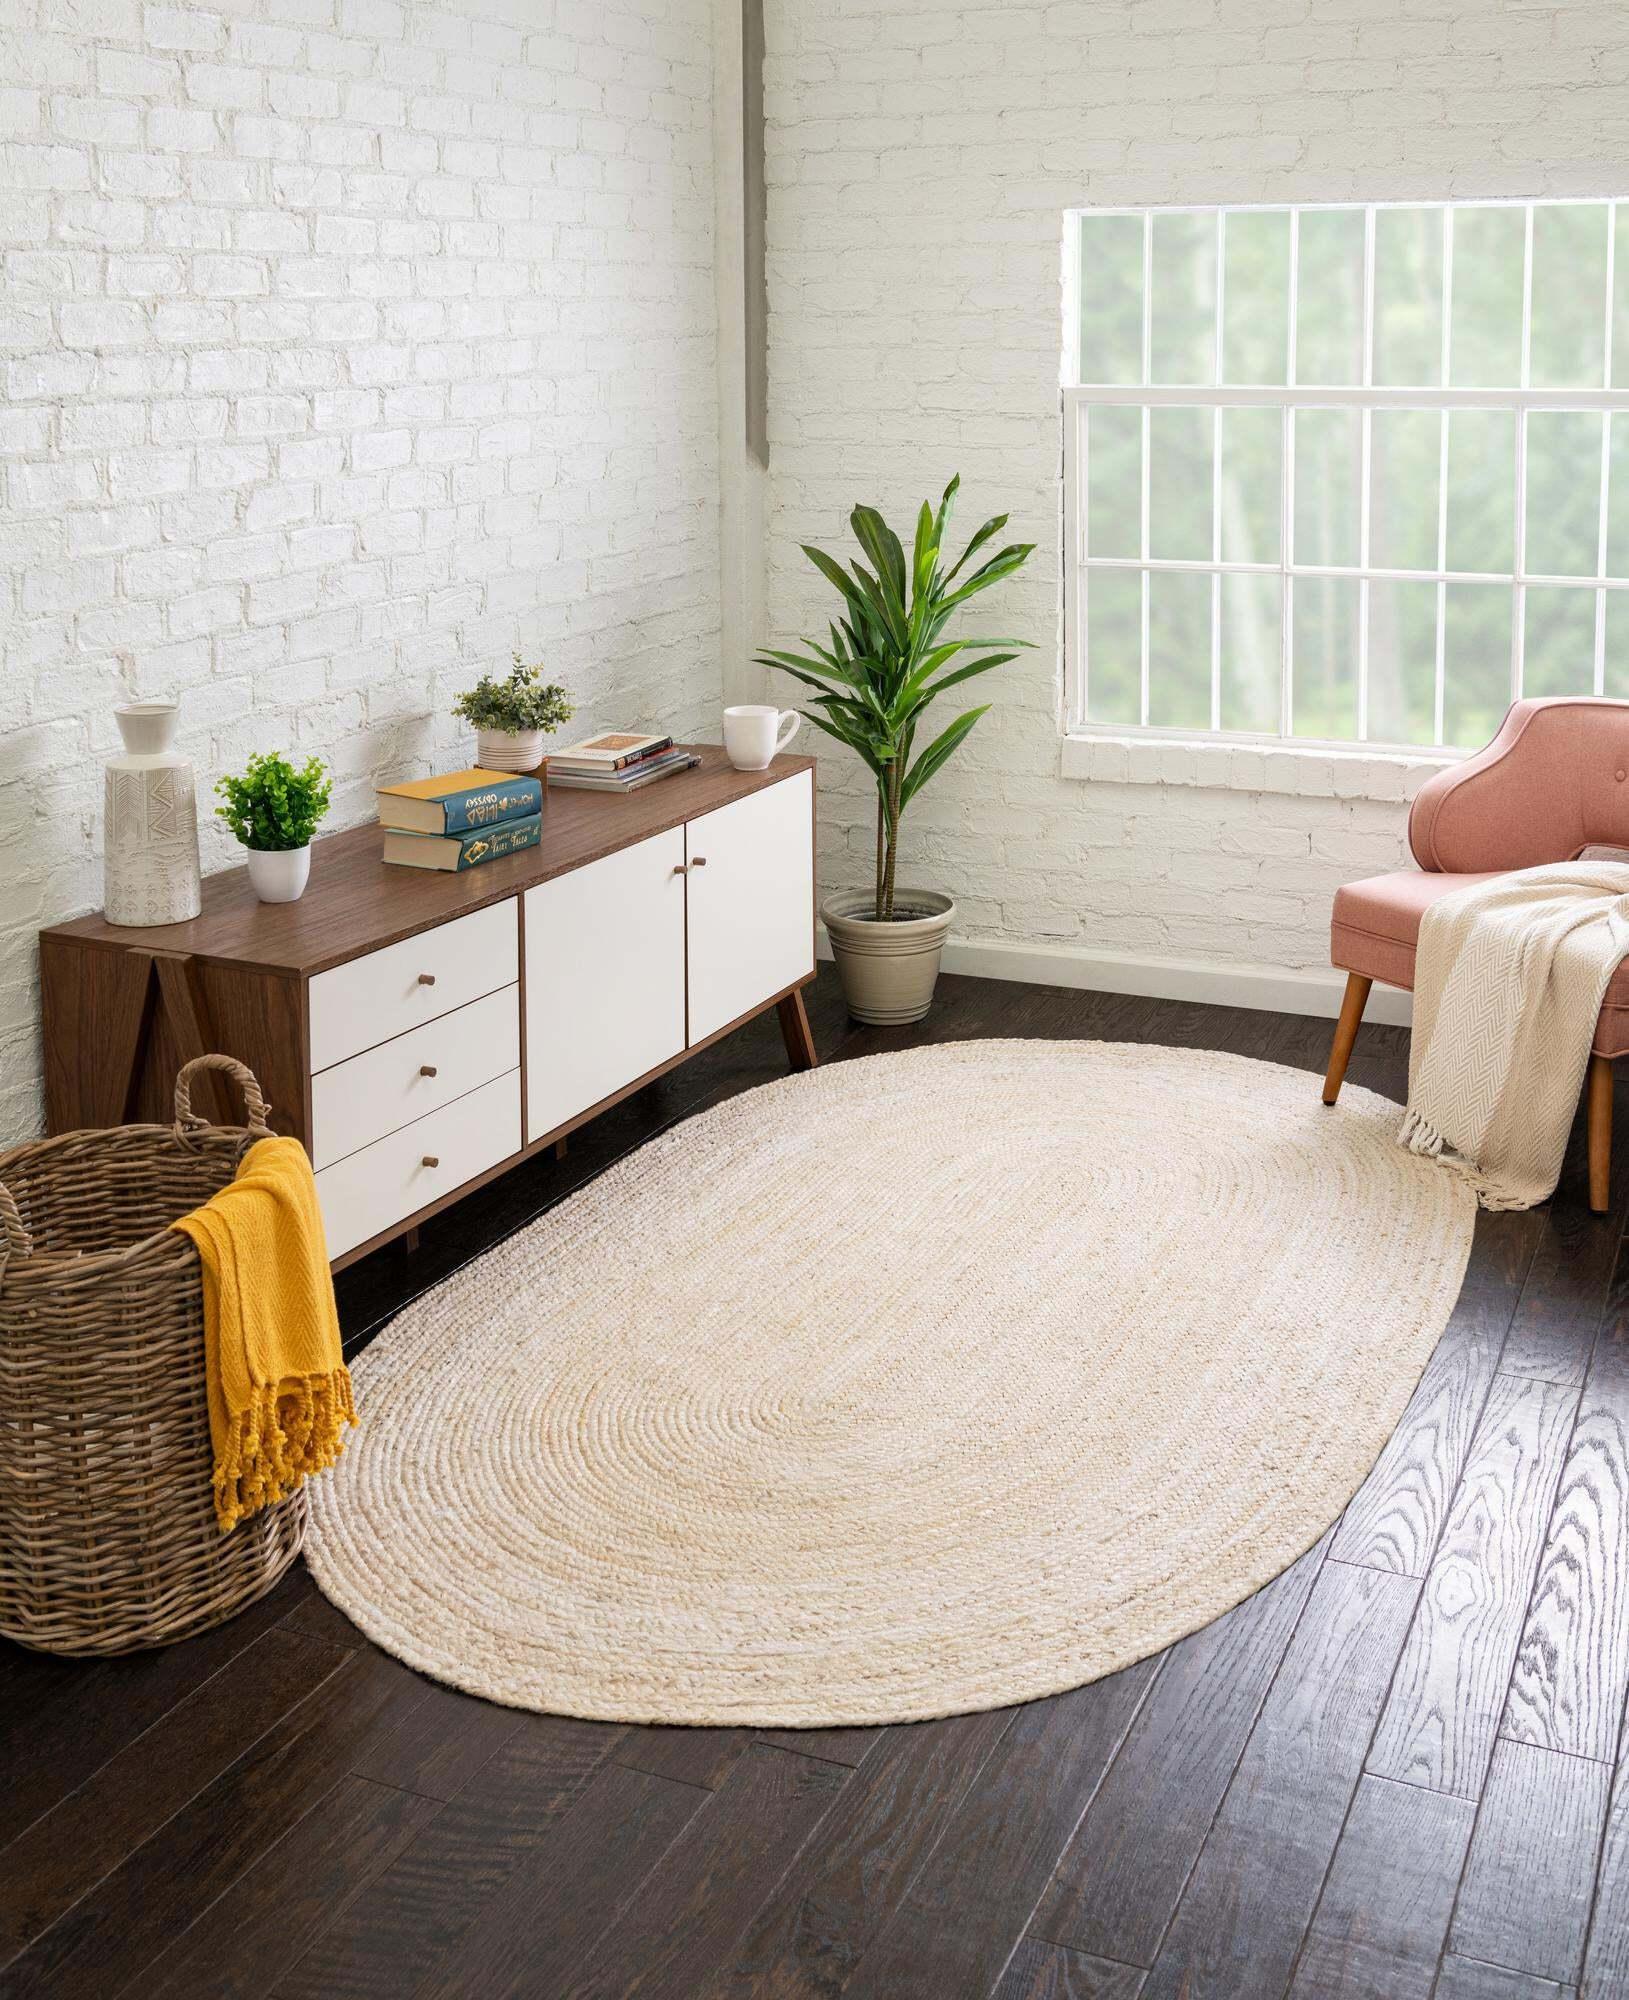 Unique Loom Indoor Rugs - Braided Jute Solid Oval 8x10 Oval Rug Beige & Natural